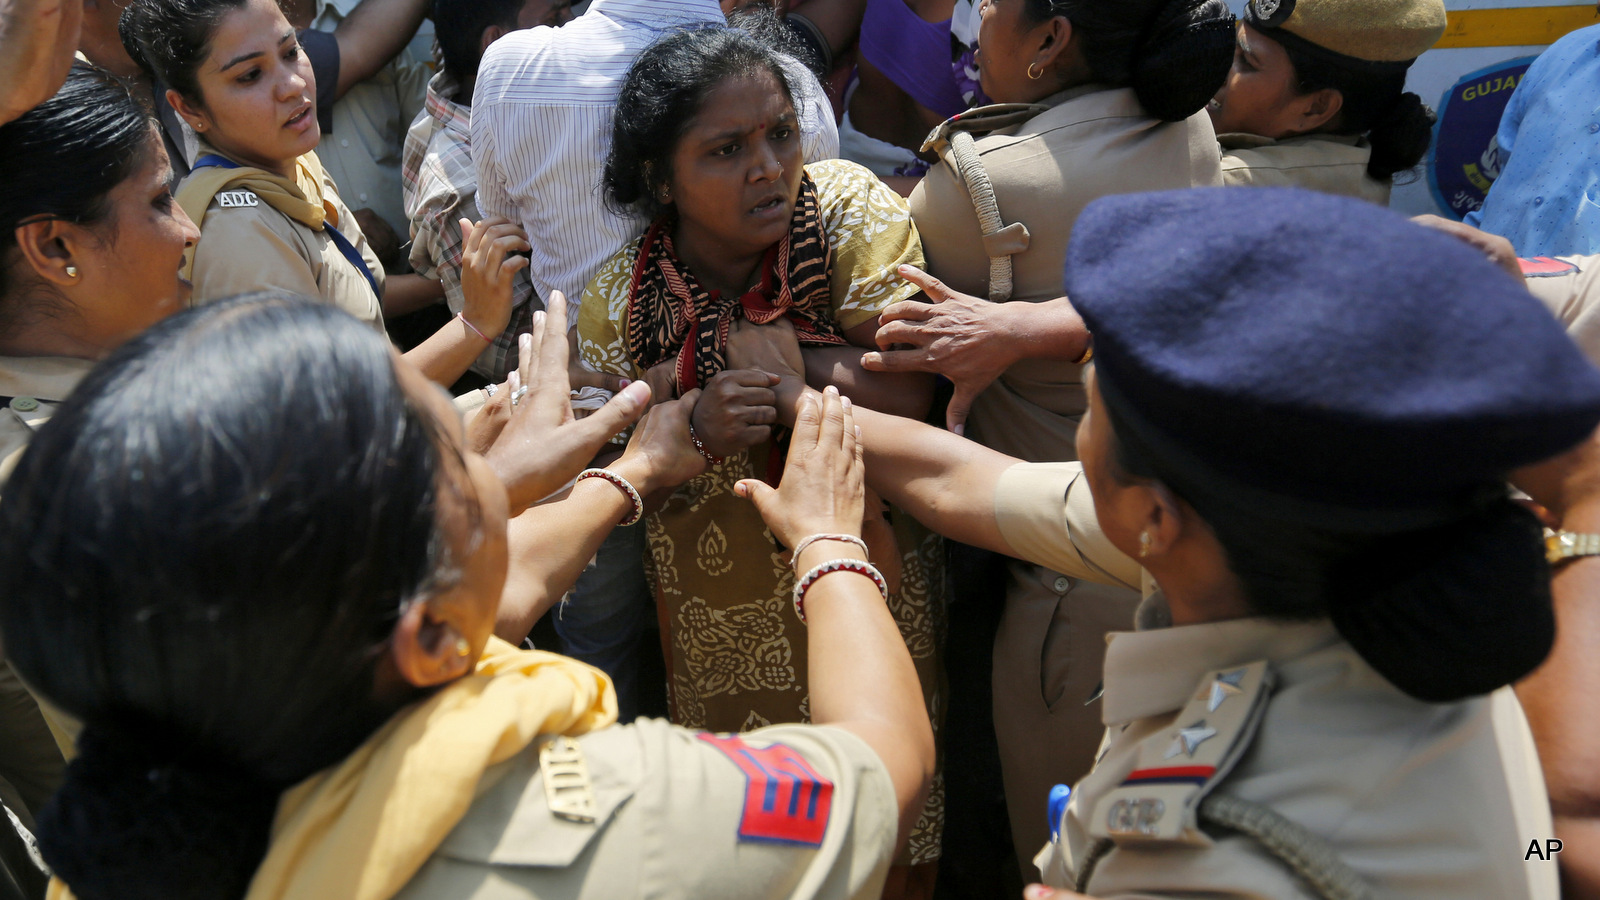 Indian policewomen detain a sanitation worker during a protest in Ahmadabad, India, Tuesday, Sept. 27, 2016. The protestors demanded permanent jobs for sanitation workers who had been employed on contract basis for several years in the Ahmadabad Municipal Corporation.